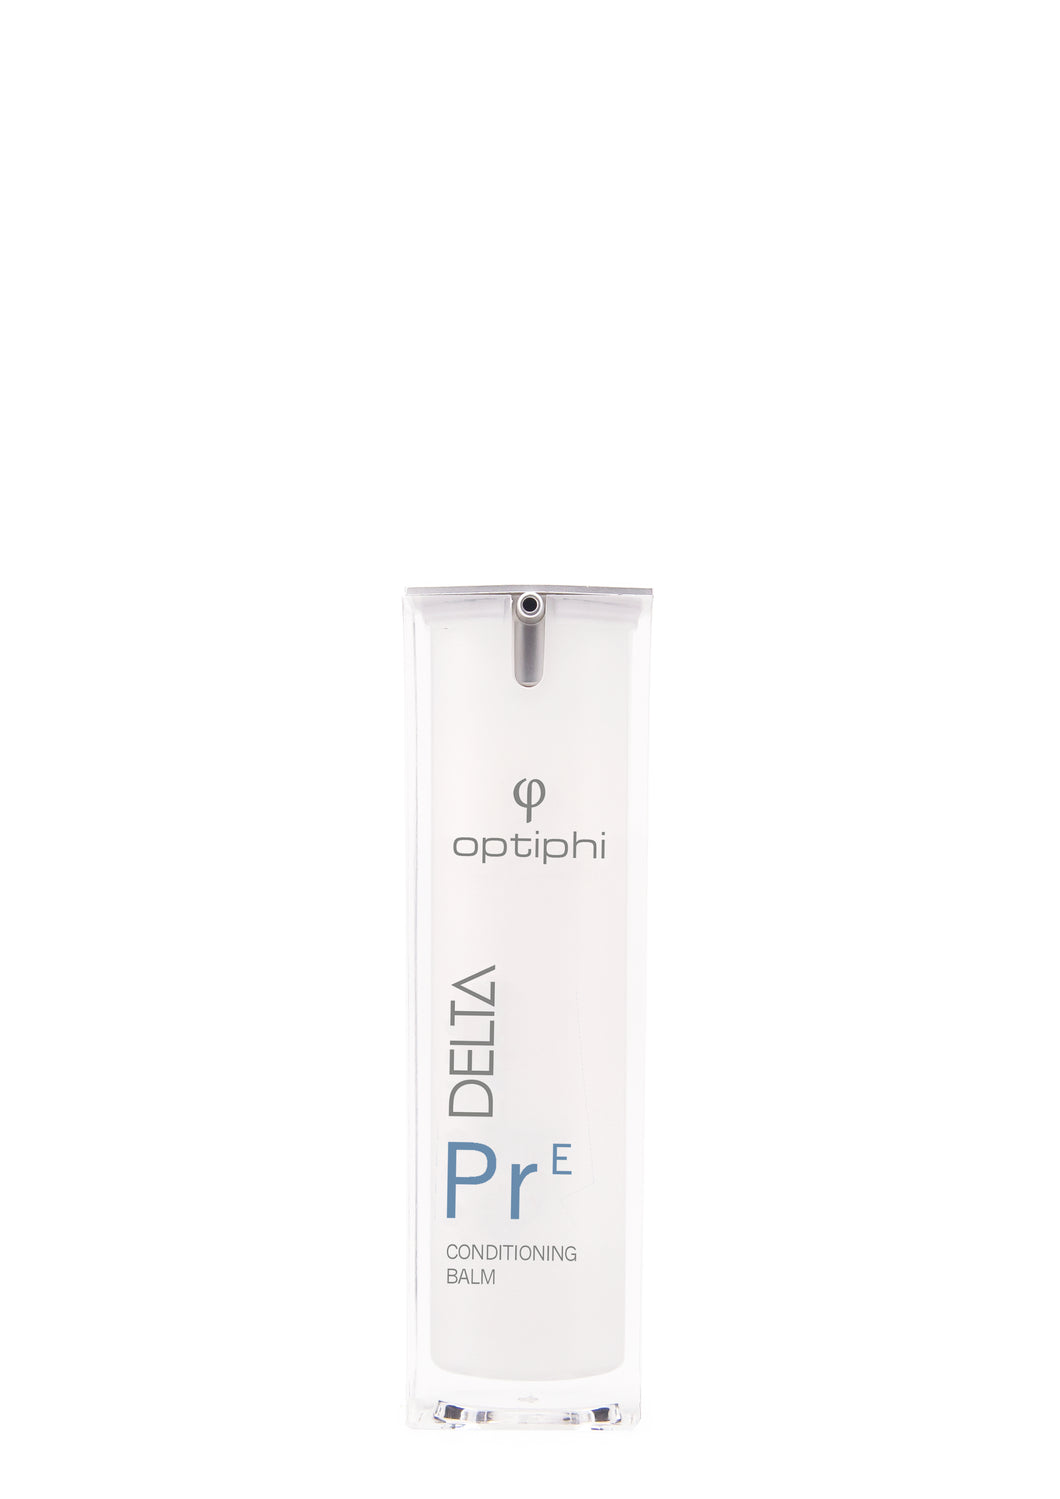 This topical is formulated to prepare the skin prior to an aesthetic treatment by normalizing epithelialization, supporting inherent protection mechanisms, reducing sensitivity, and kickstarting the synthesis of collagen, hyaluronic acid and other dermal matrix elements.